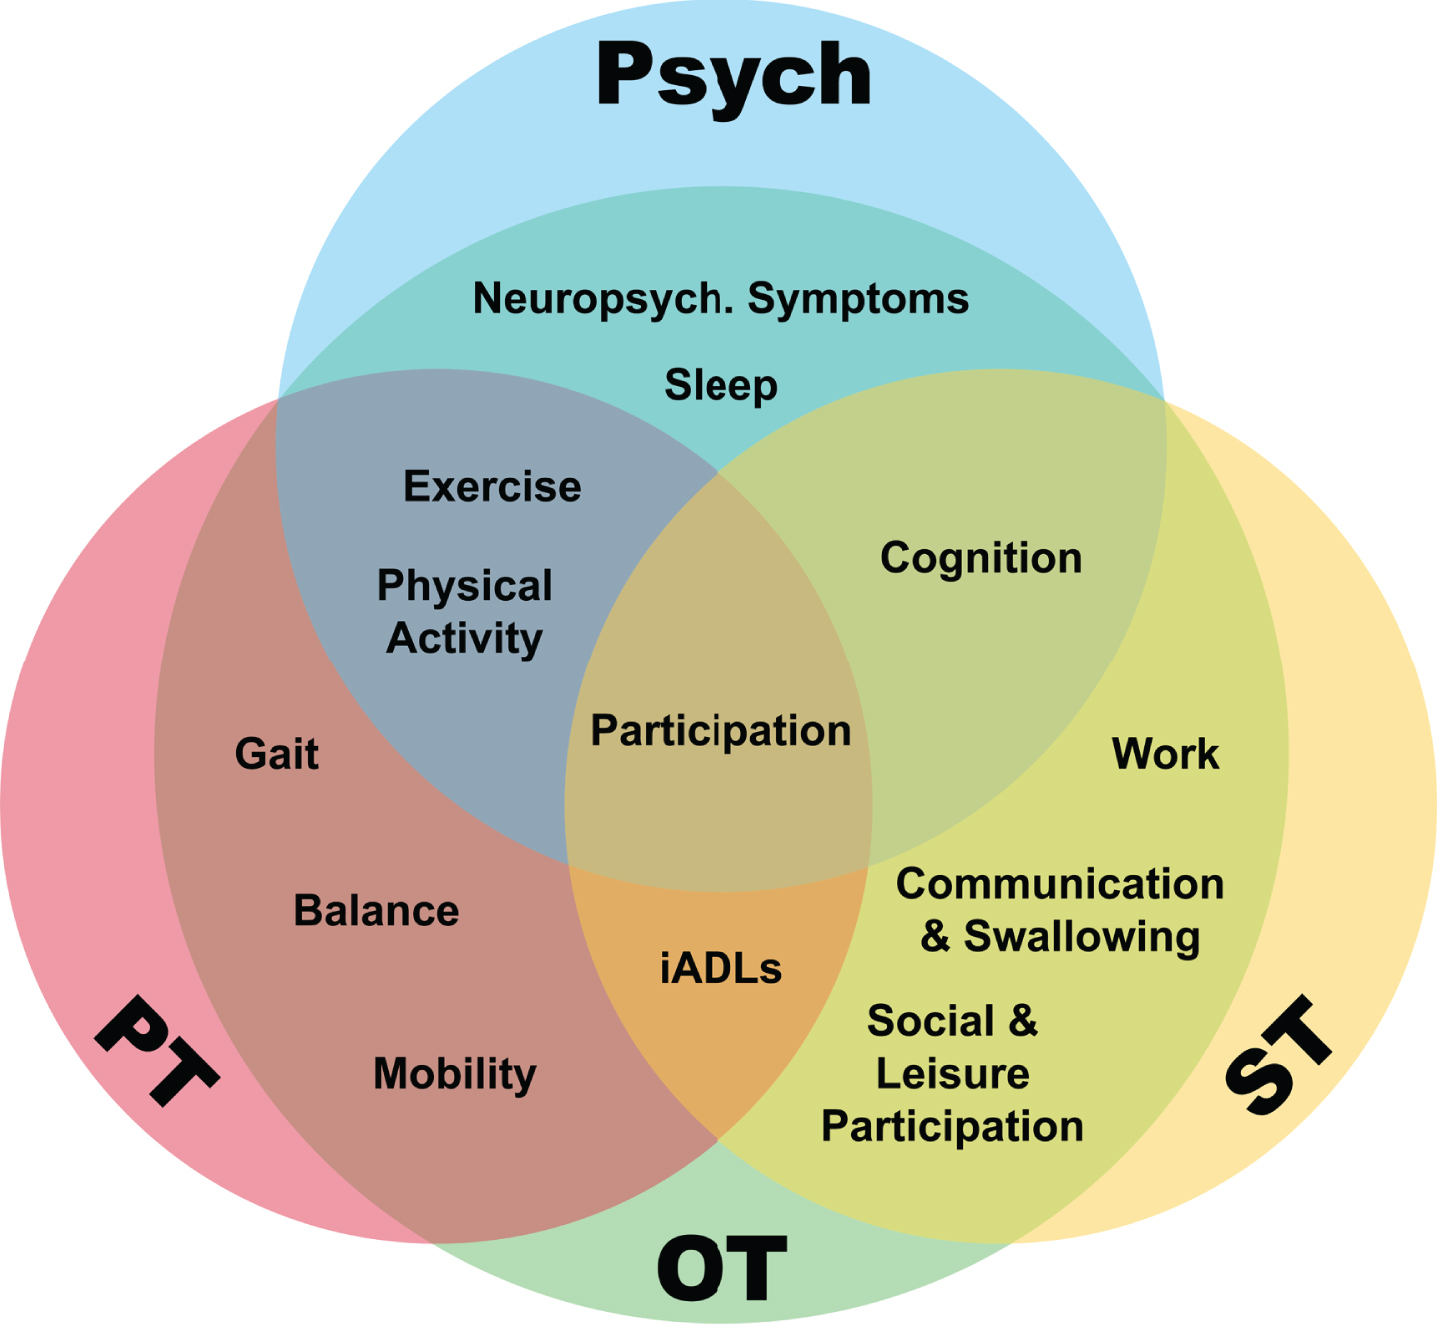 A transdisciplinary model demonstrating overlap between allied health disciplines and many of the target areas they address in early Parkinson’s disease. PT, physical therapy; OT, occupational therapy; ST, speech and language therapy; iADLs, instrumental activities of daily living.